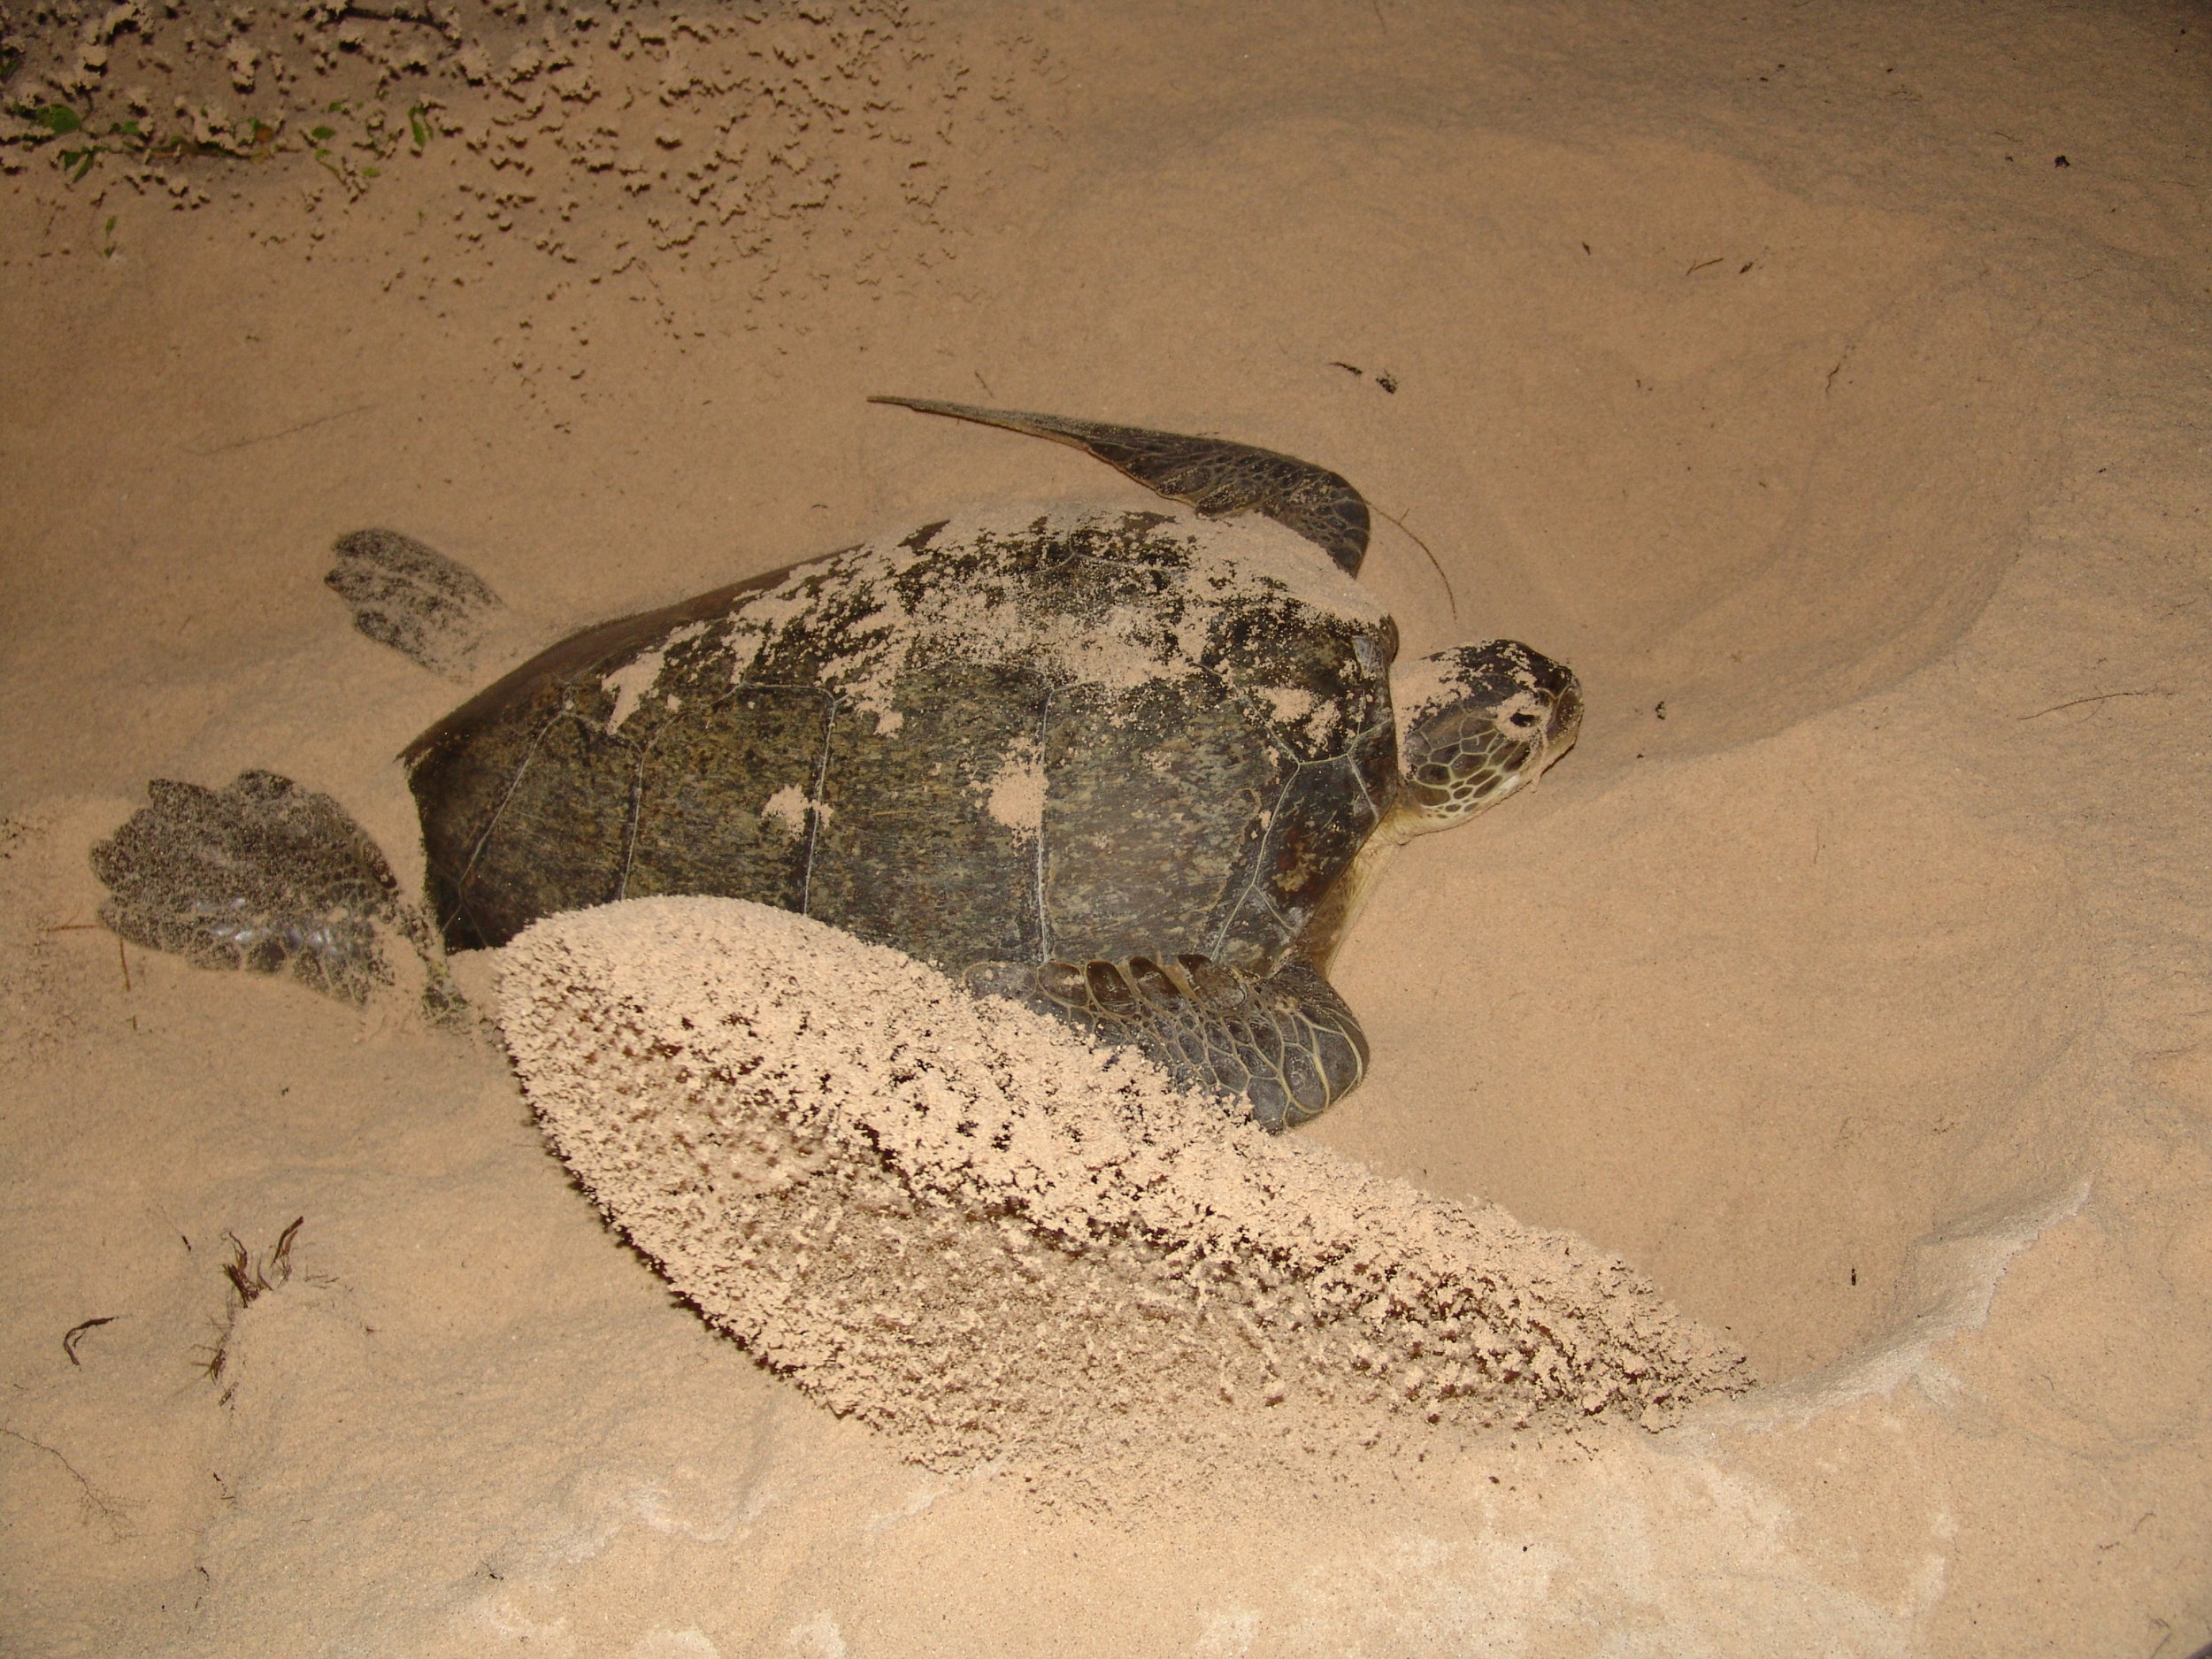 Night 6: Second night of looking for nesting turtles with local researchers.